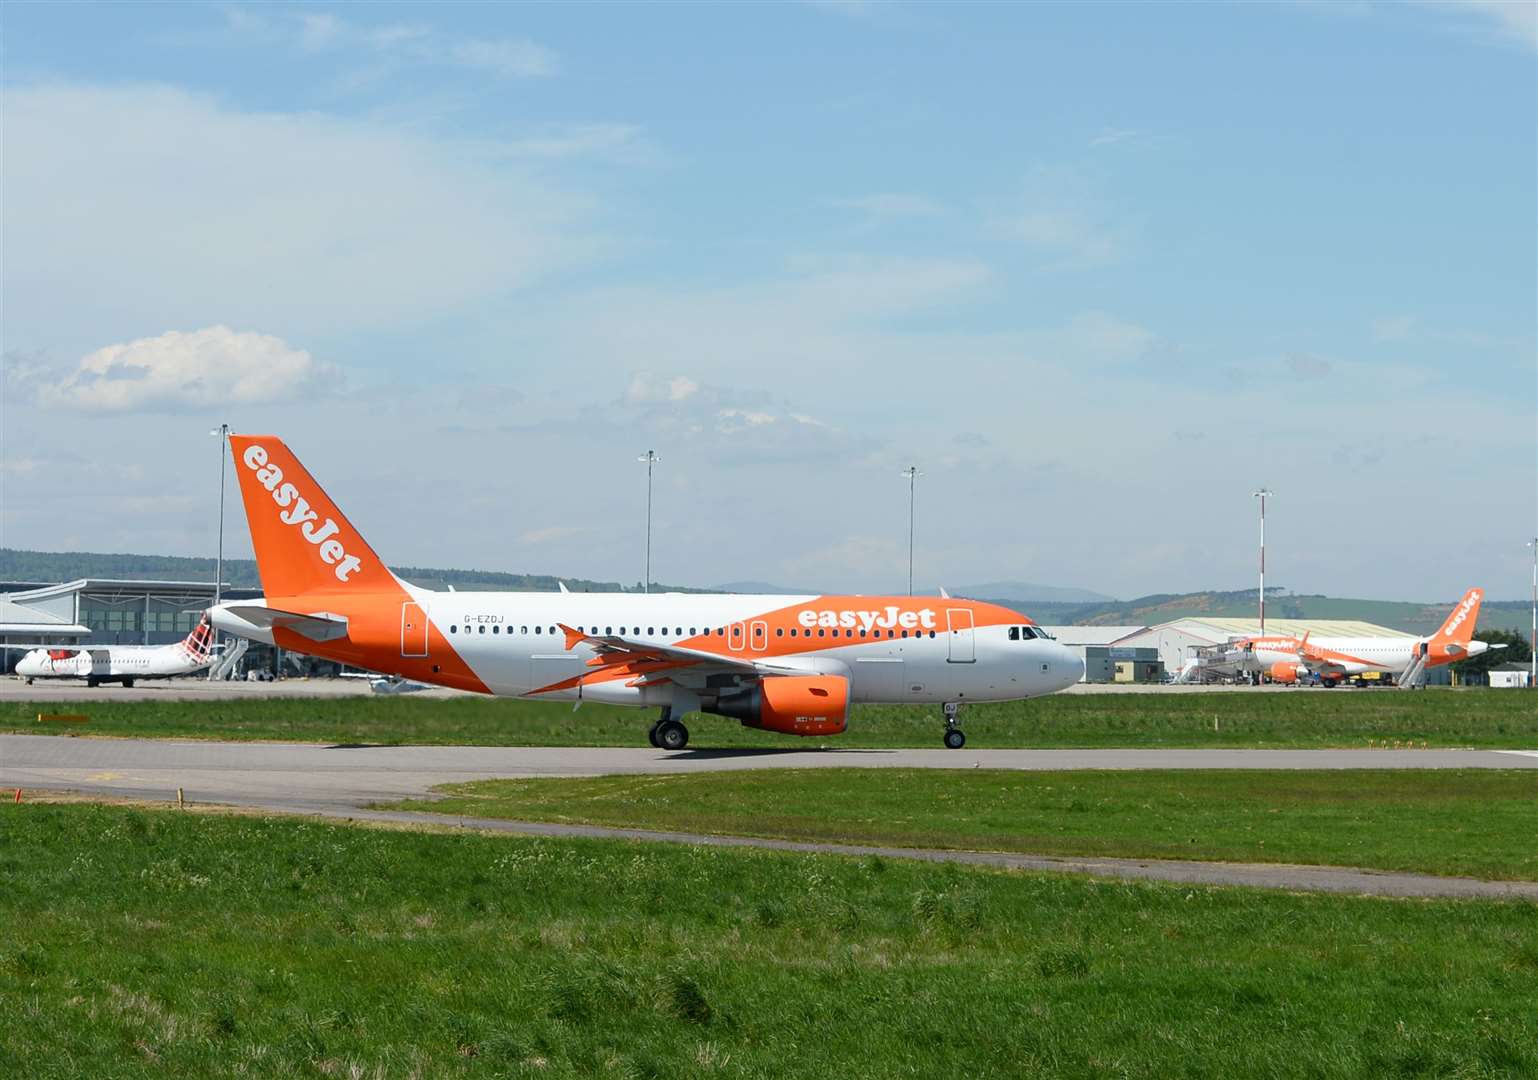 EasyJet has apologised after cancelling the early morning flight from Inverness to London Gatwick.